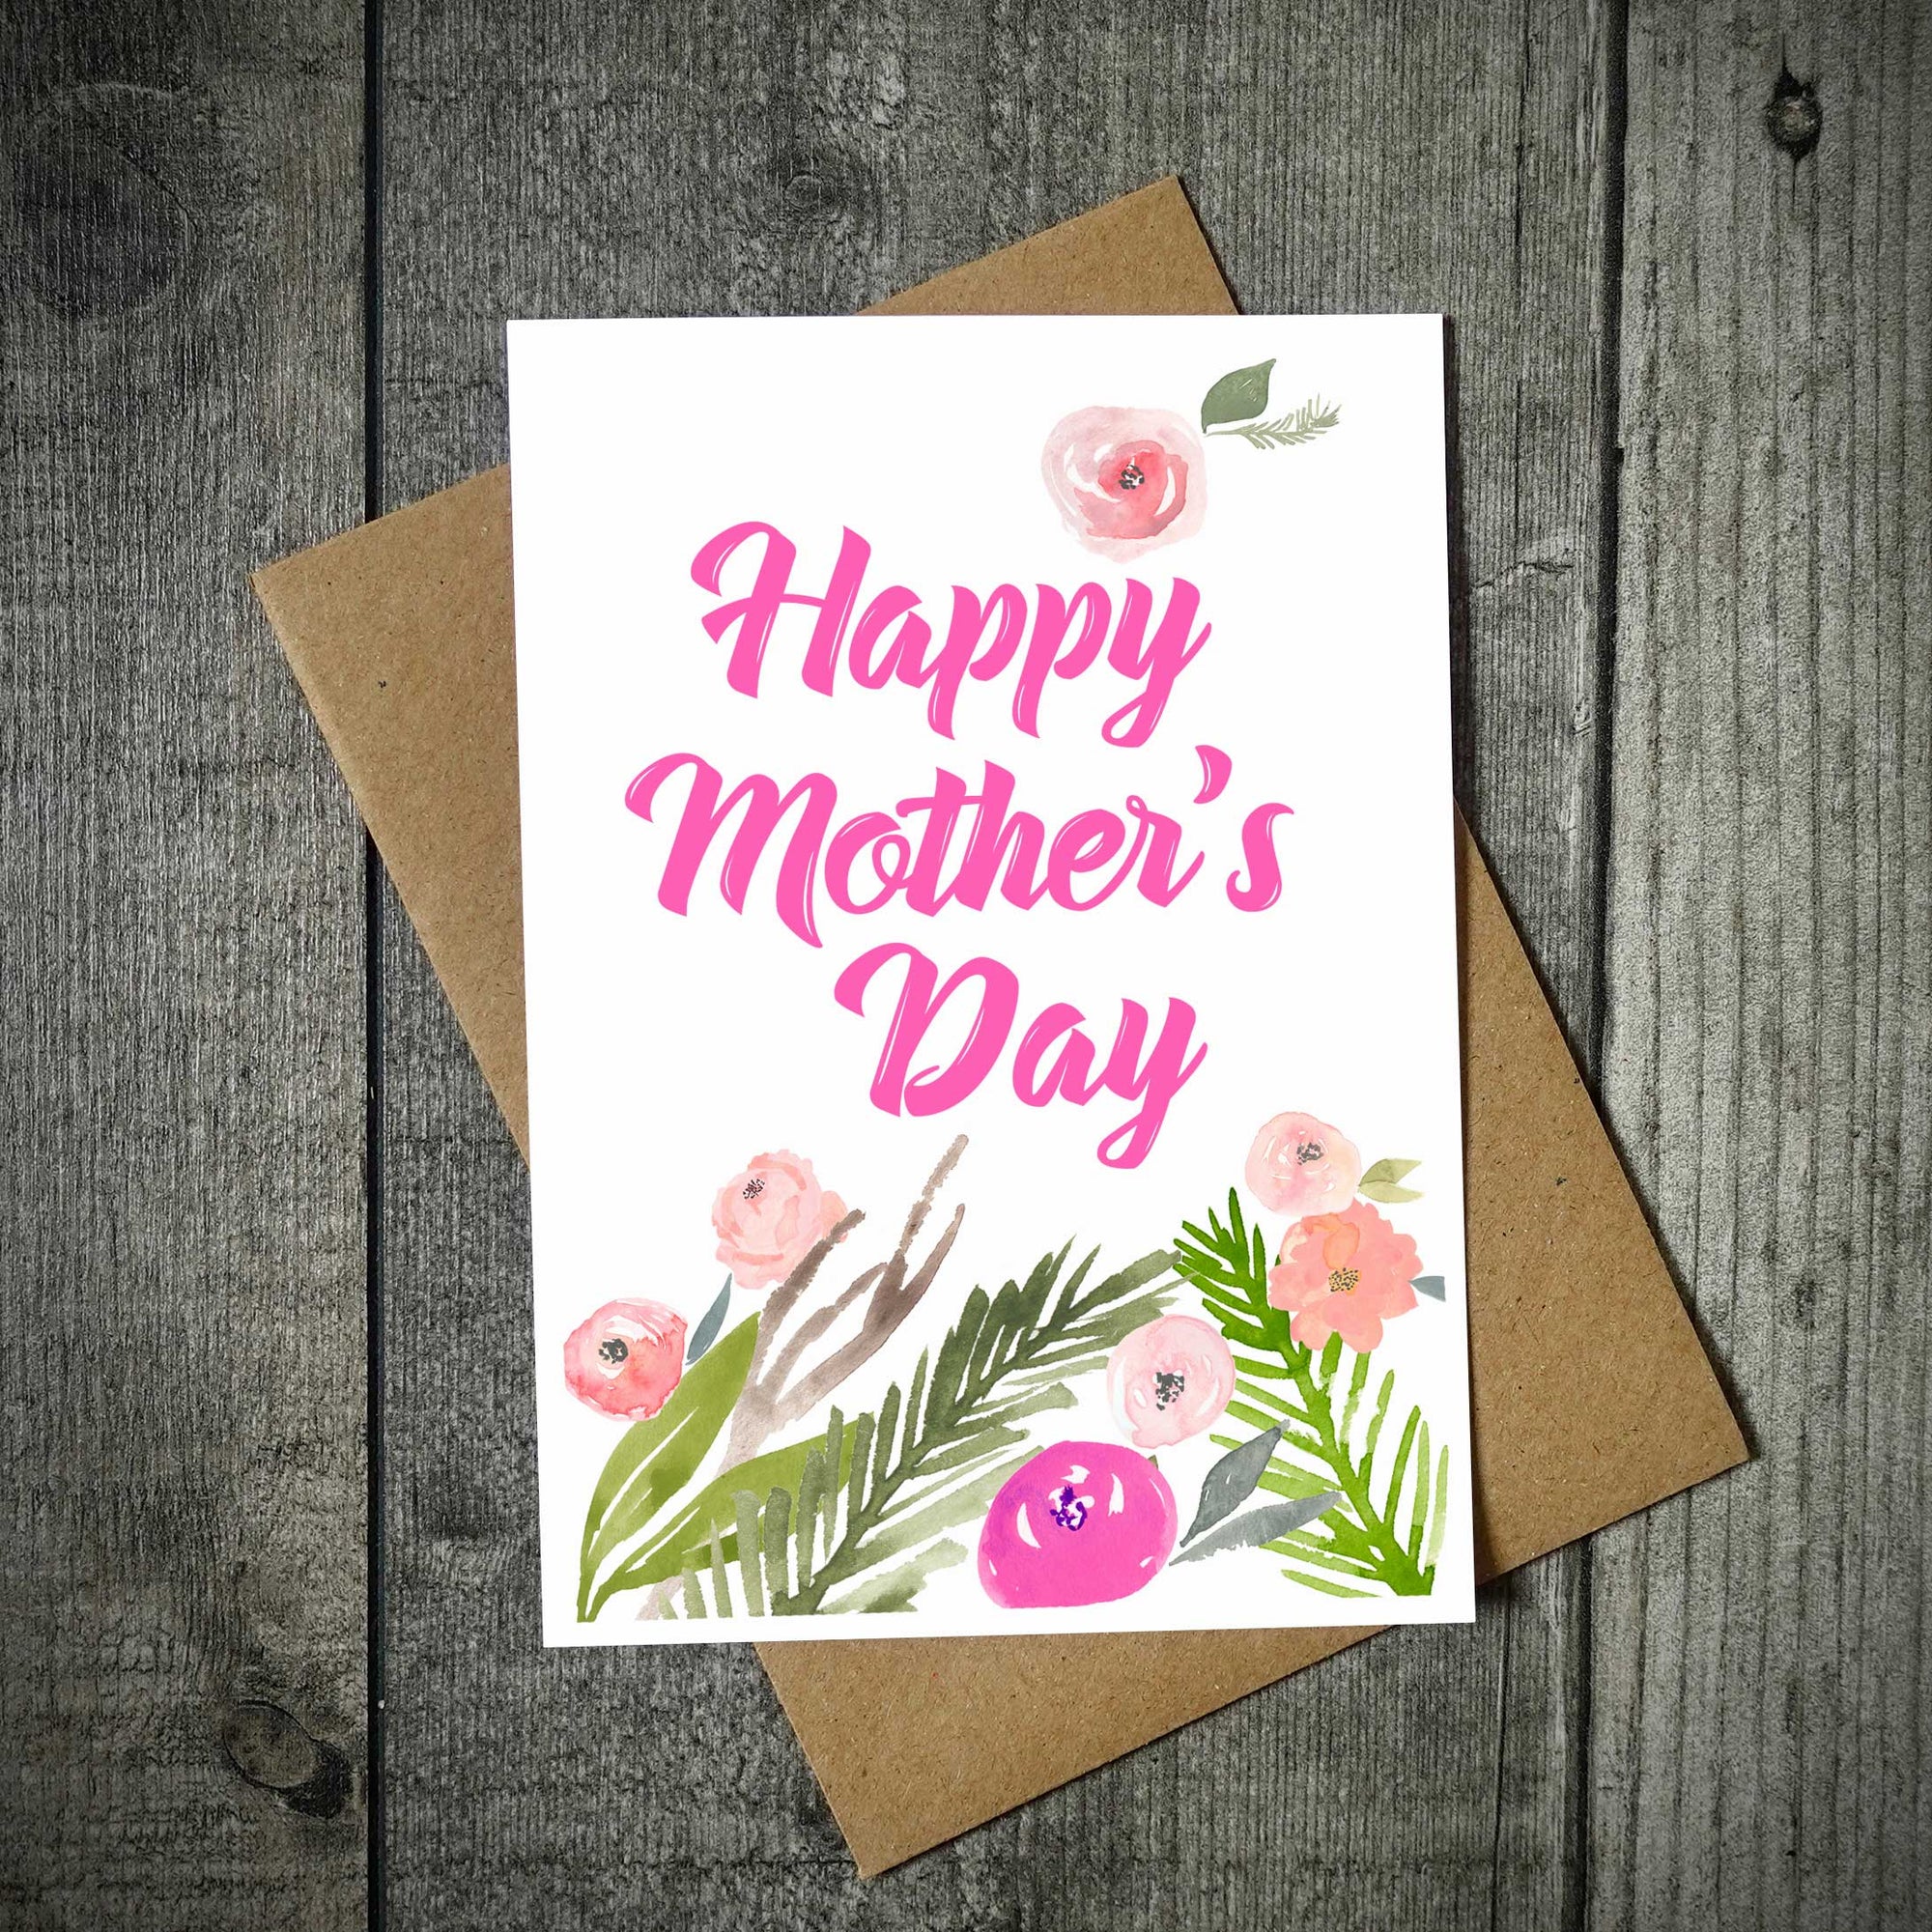 Beautiful Watercolour Flowers Mother's Day Card